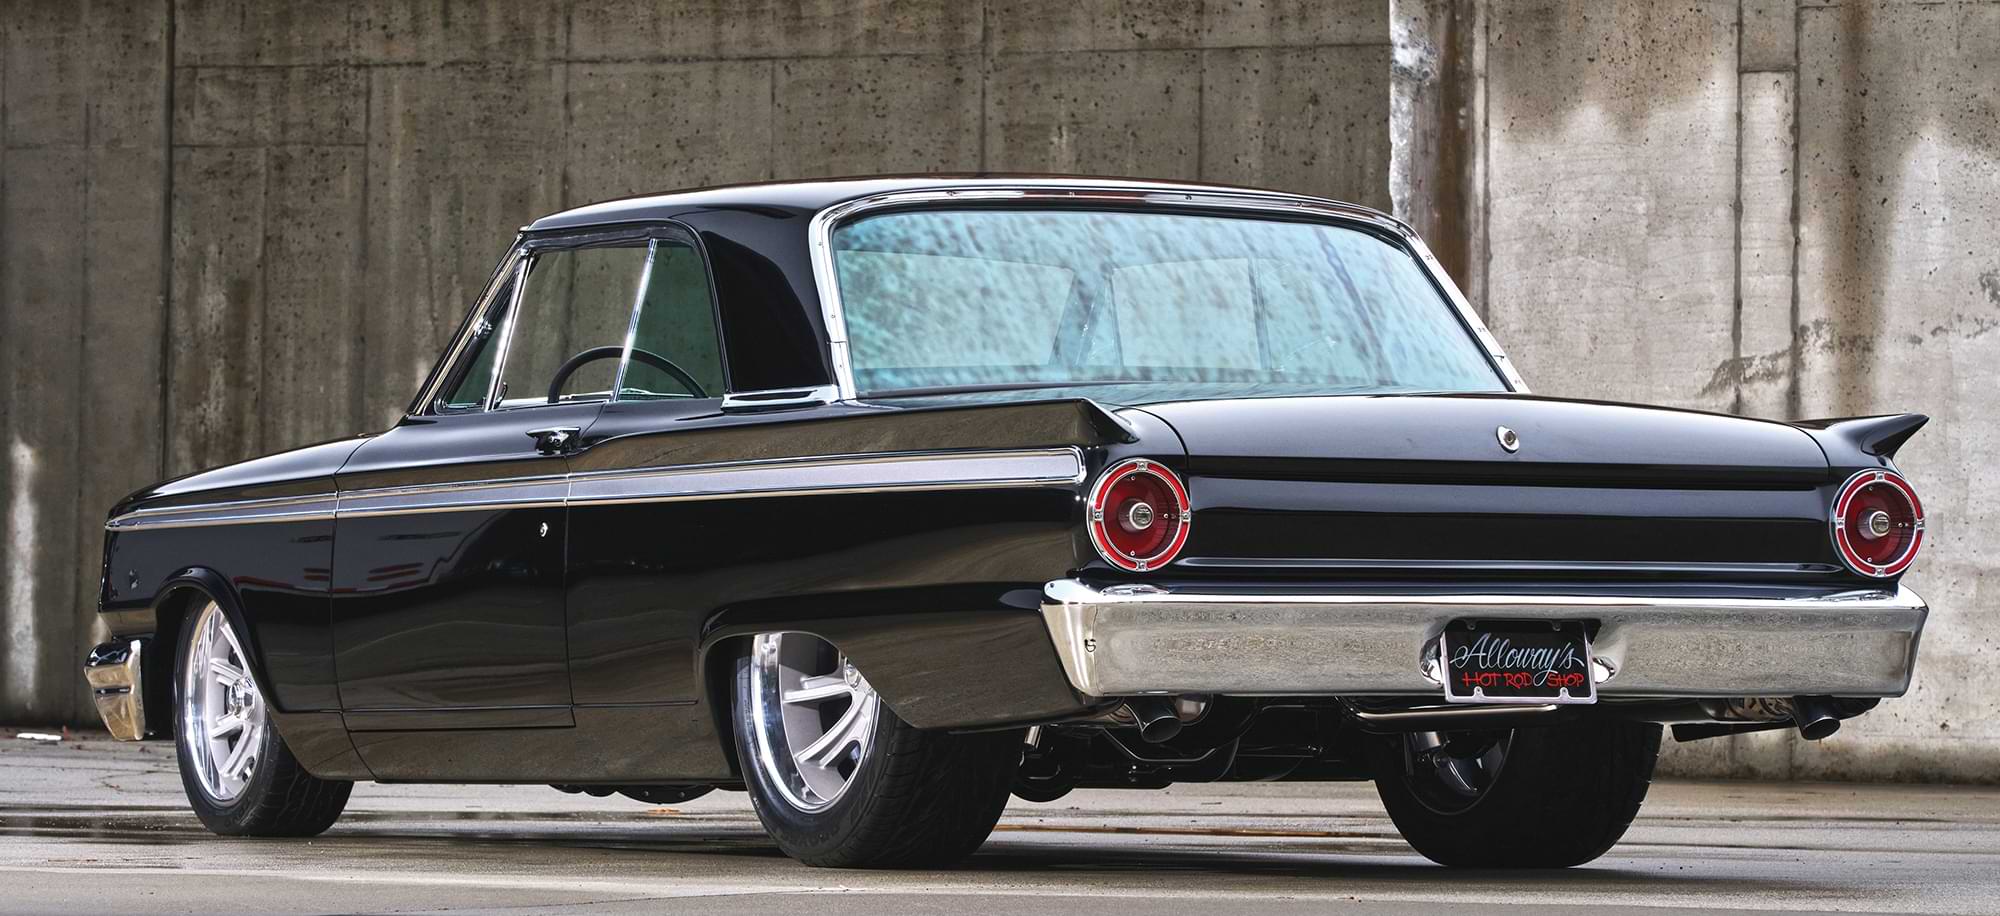 rear view of '63 Ford Fairlane